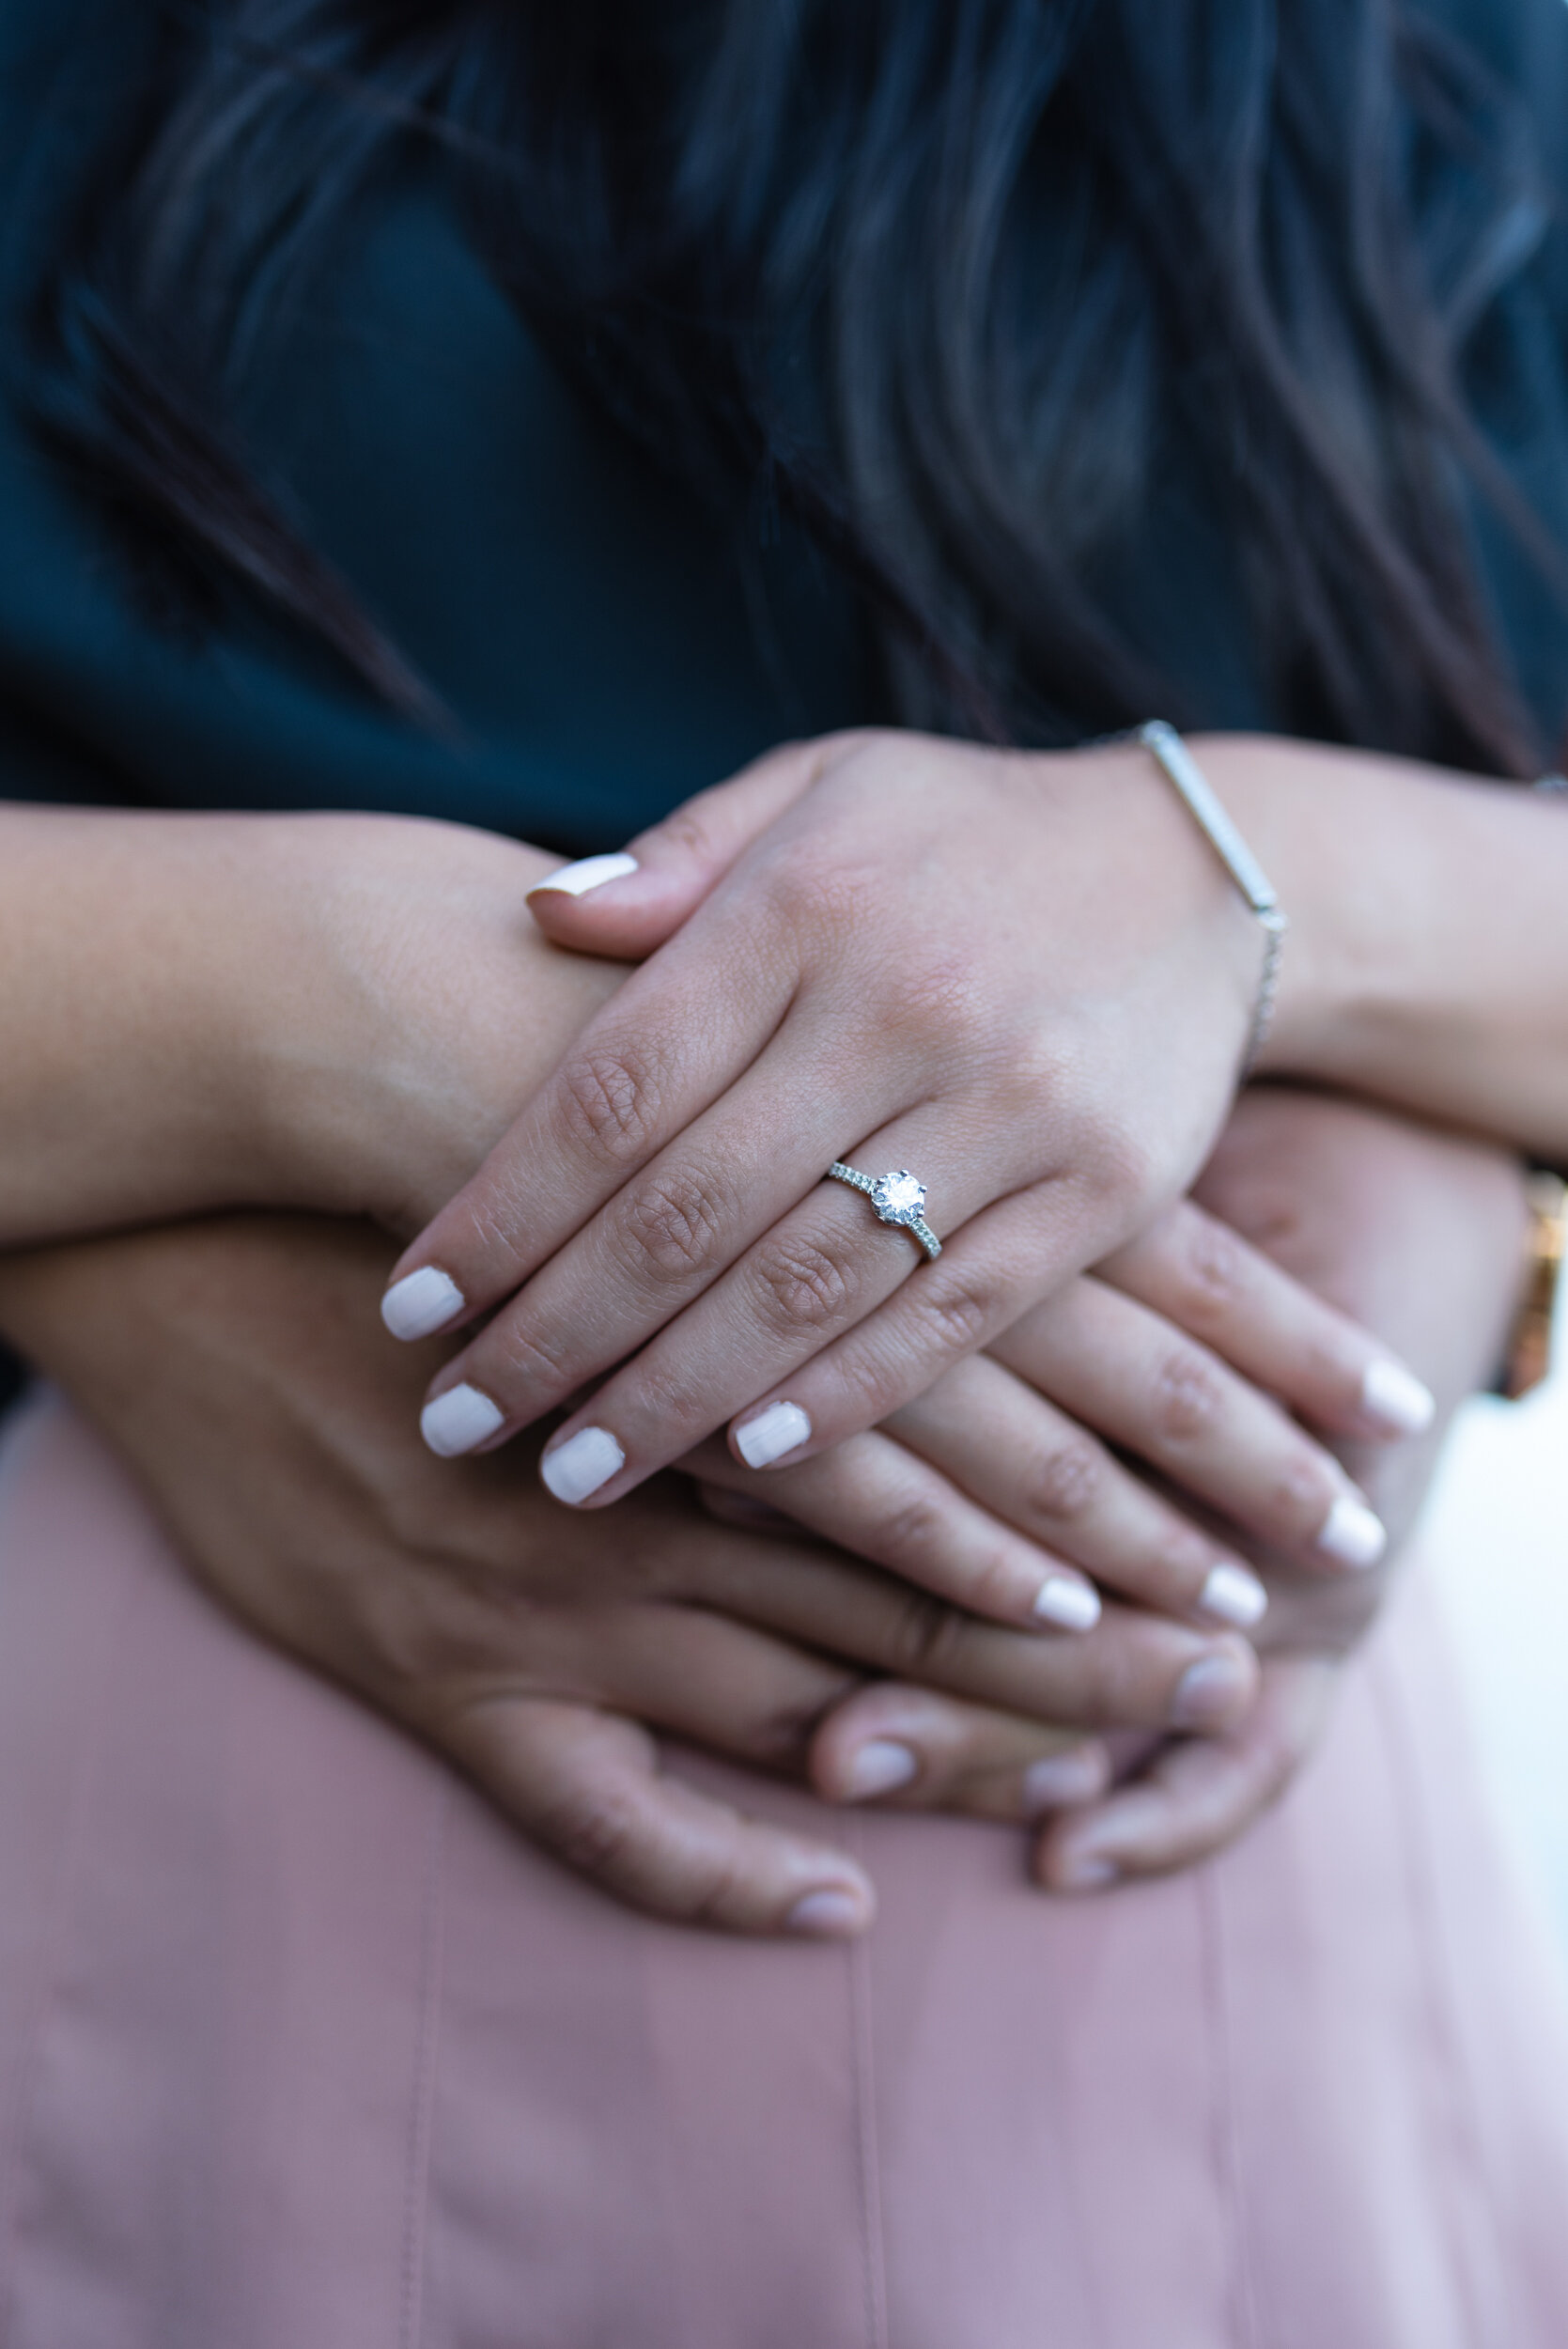 Couple's hands together showing engagement ring